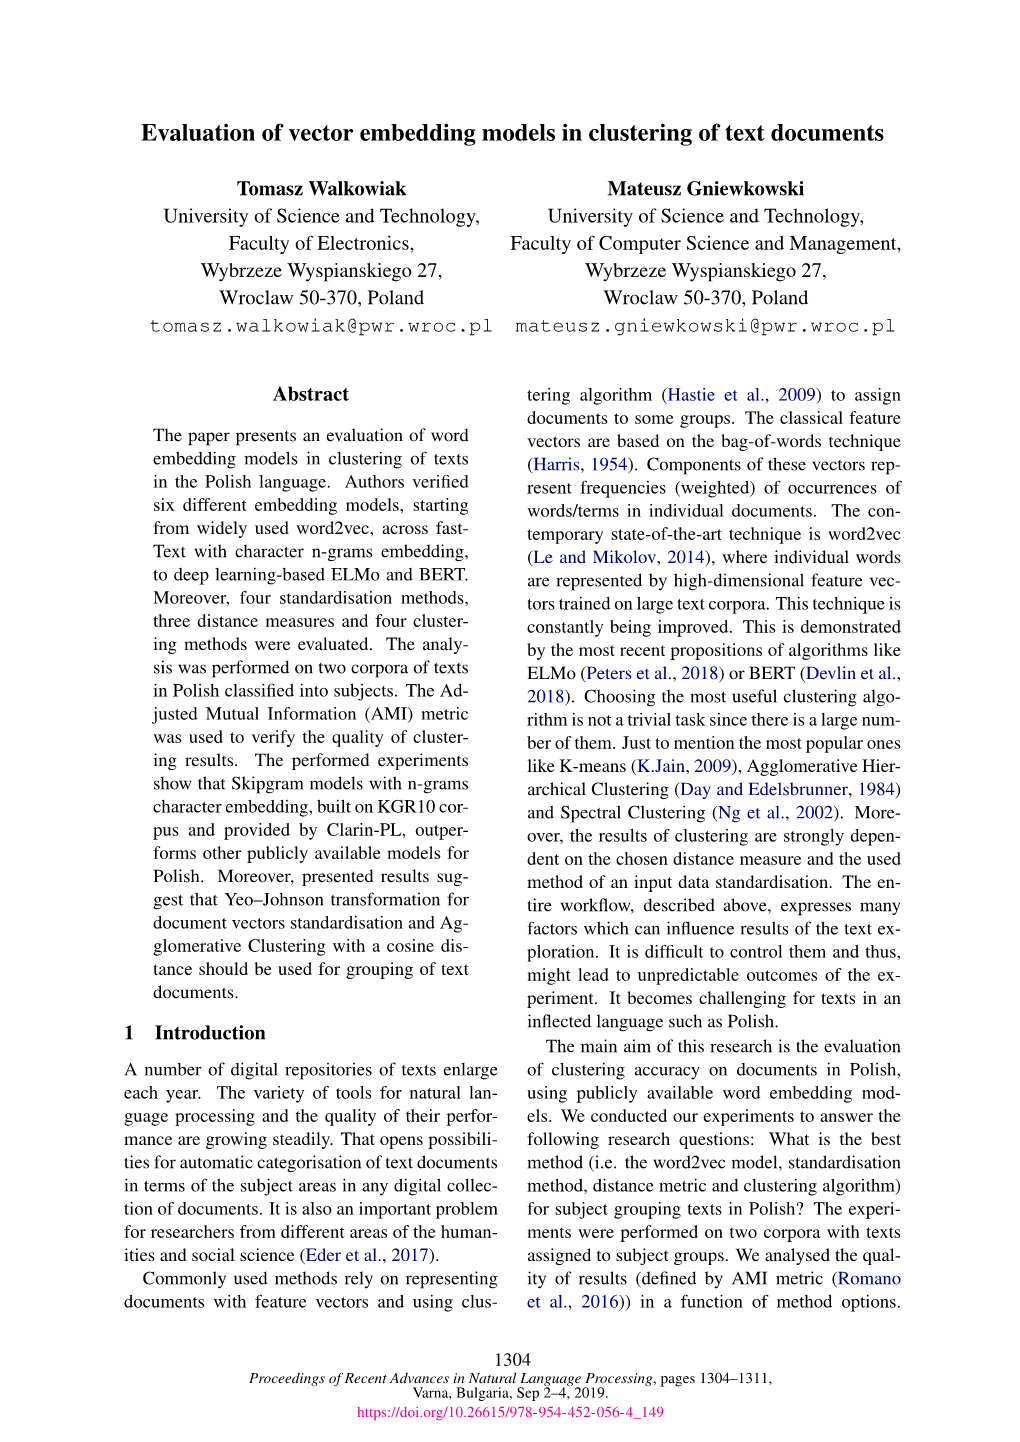 Evaluation of Vector Embedding Models in Clustering of Text Documents